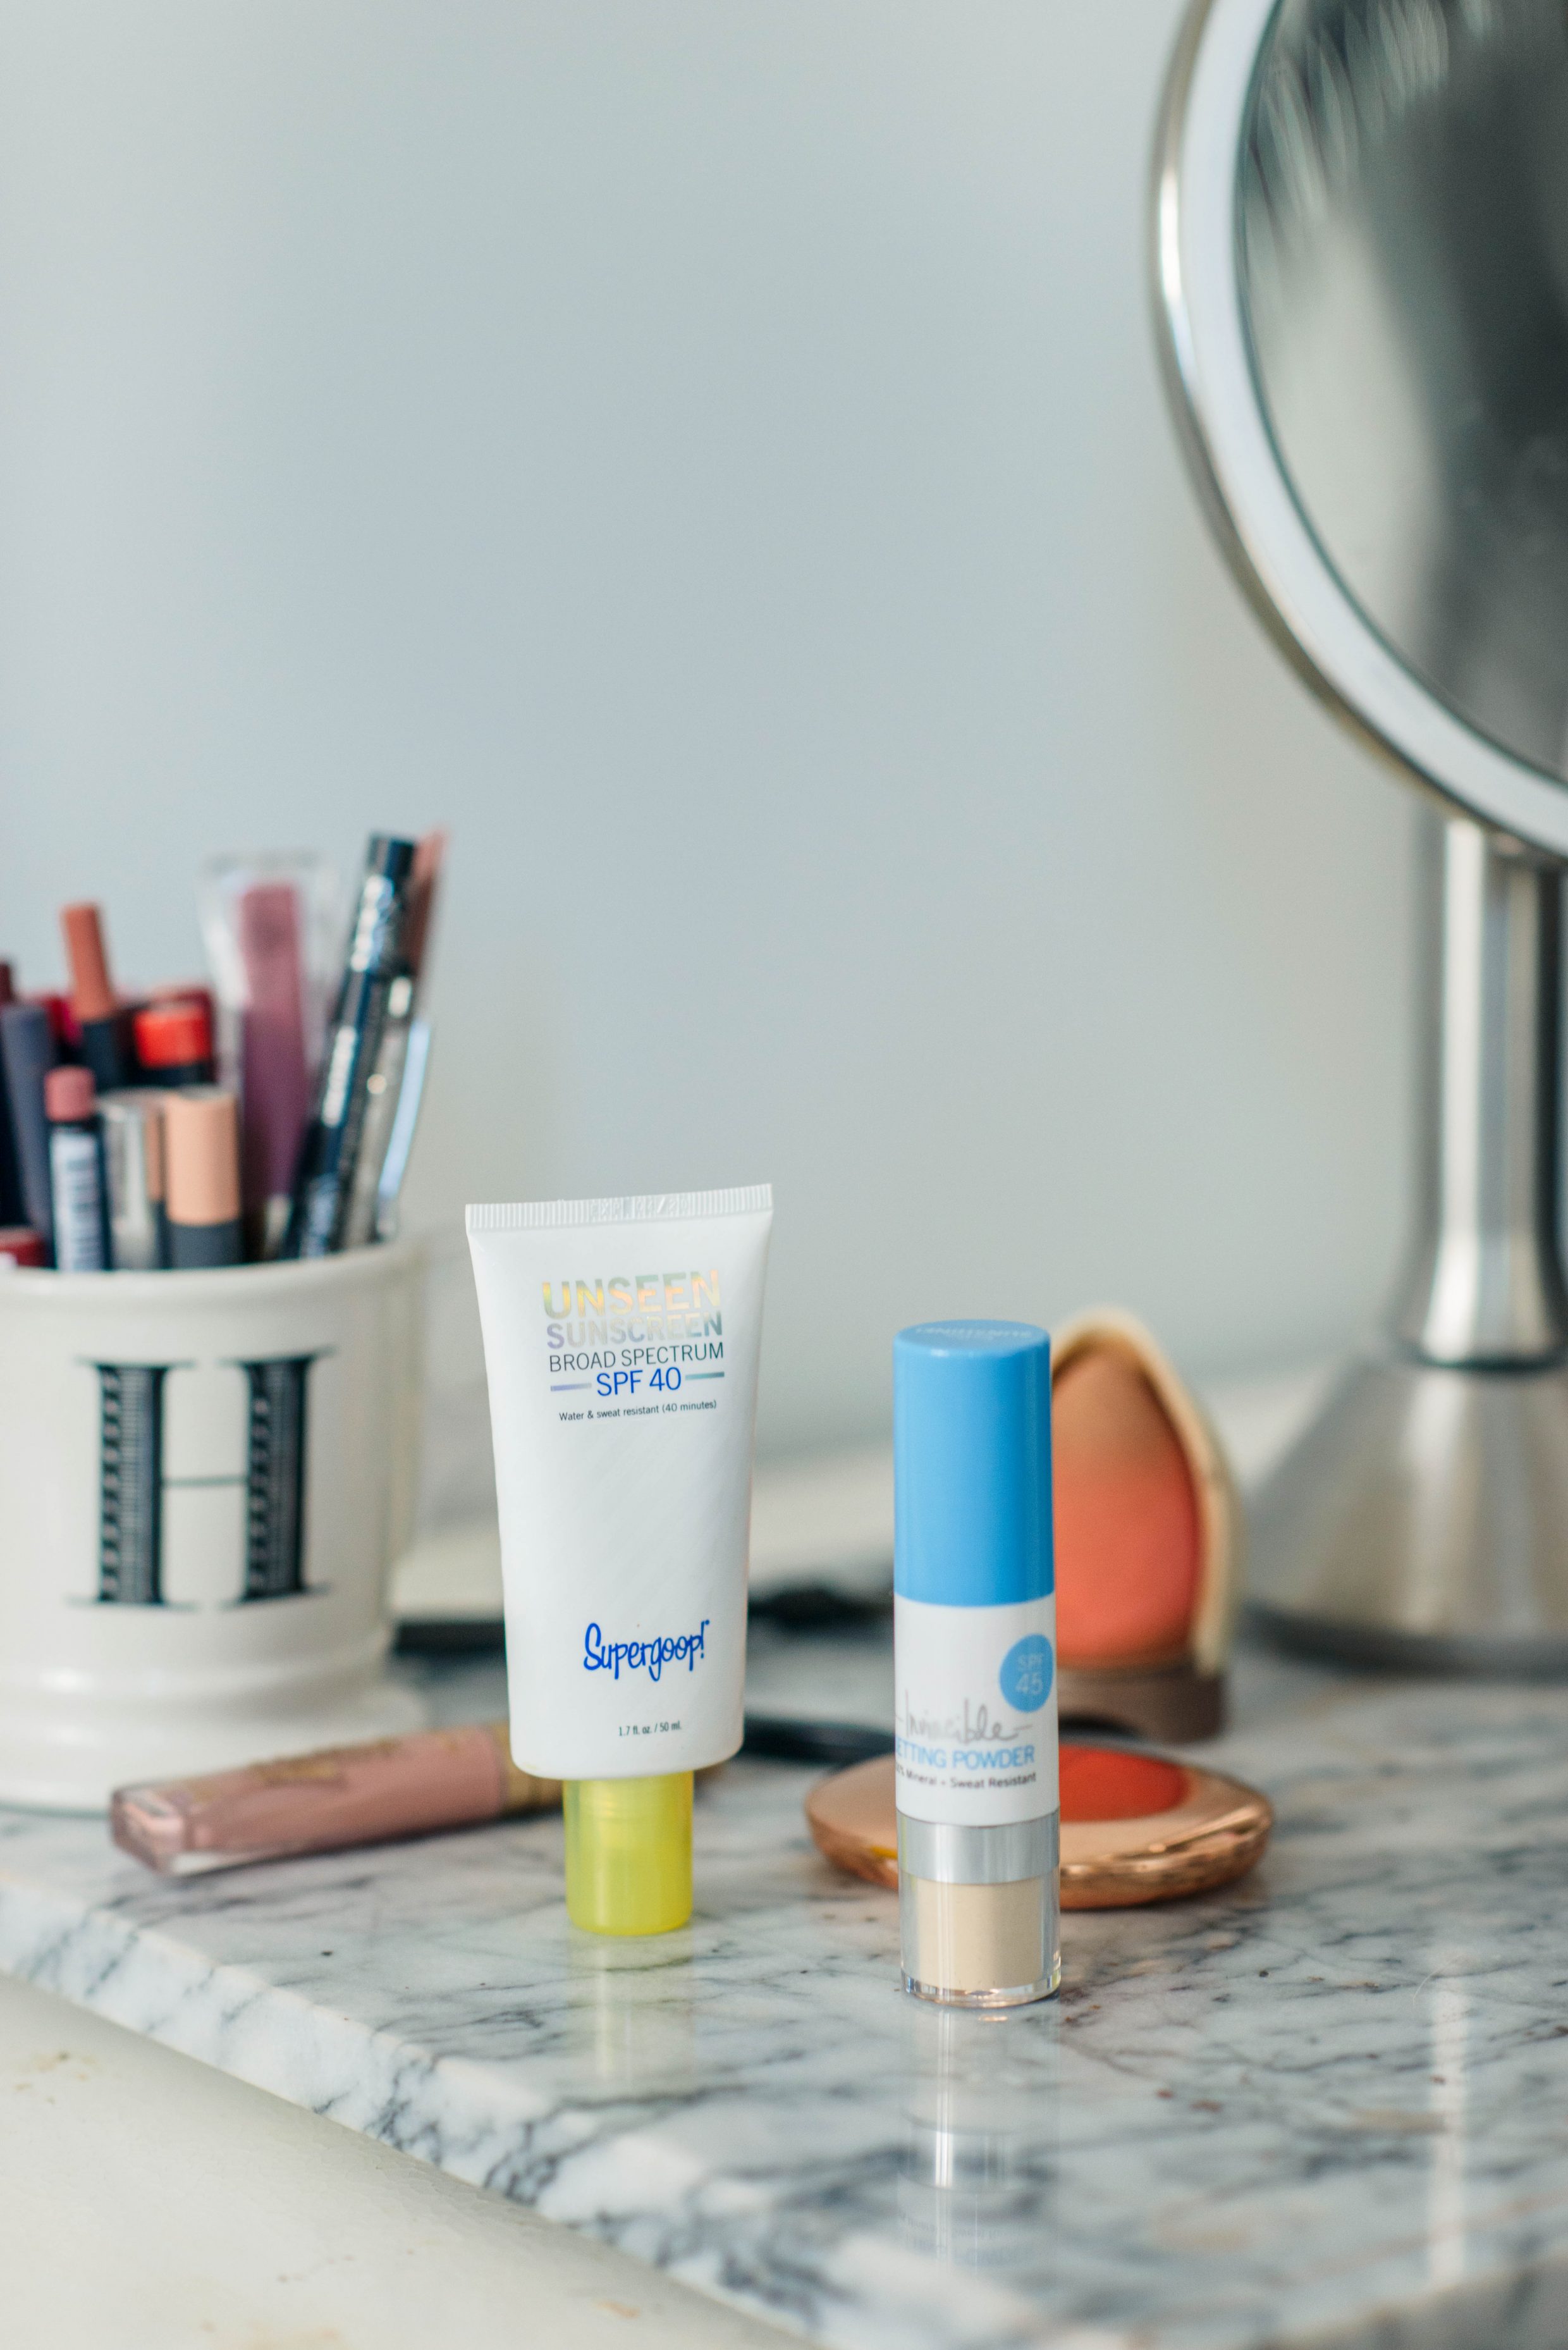 Supergoop! Favorites including the Unseen Sunscreen and Invincible Setting Powder